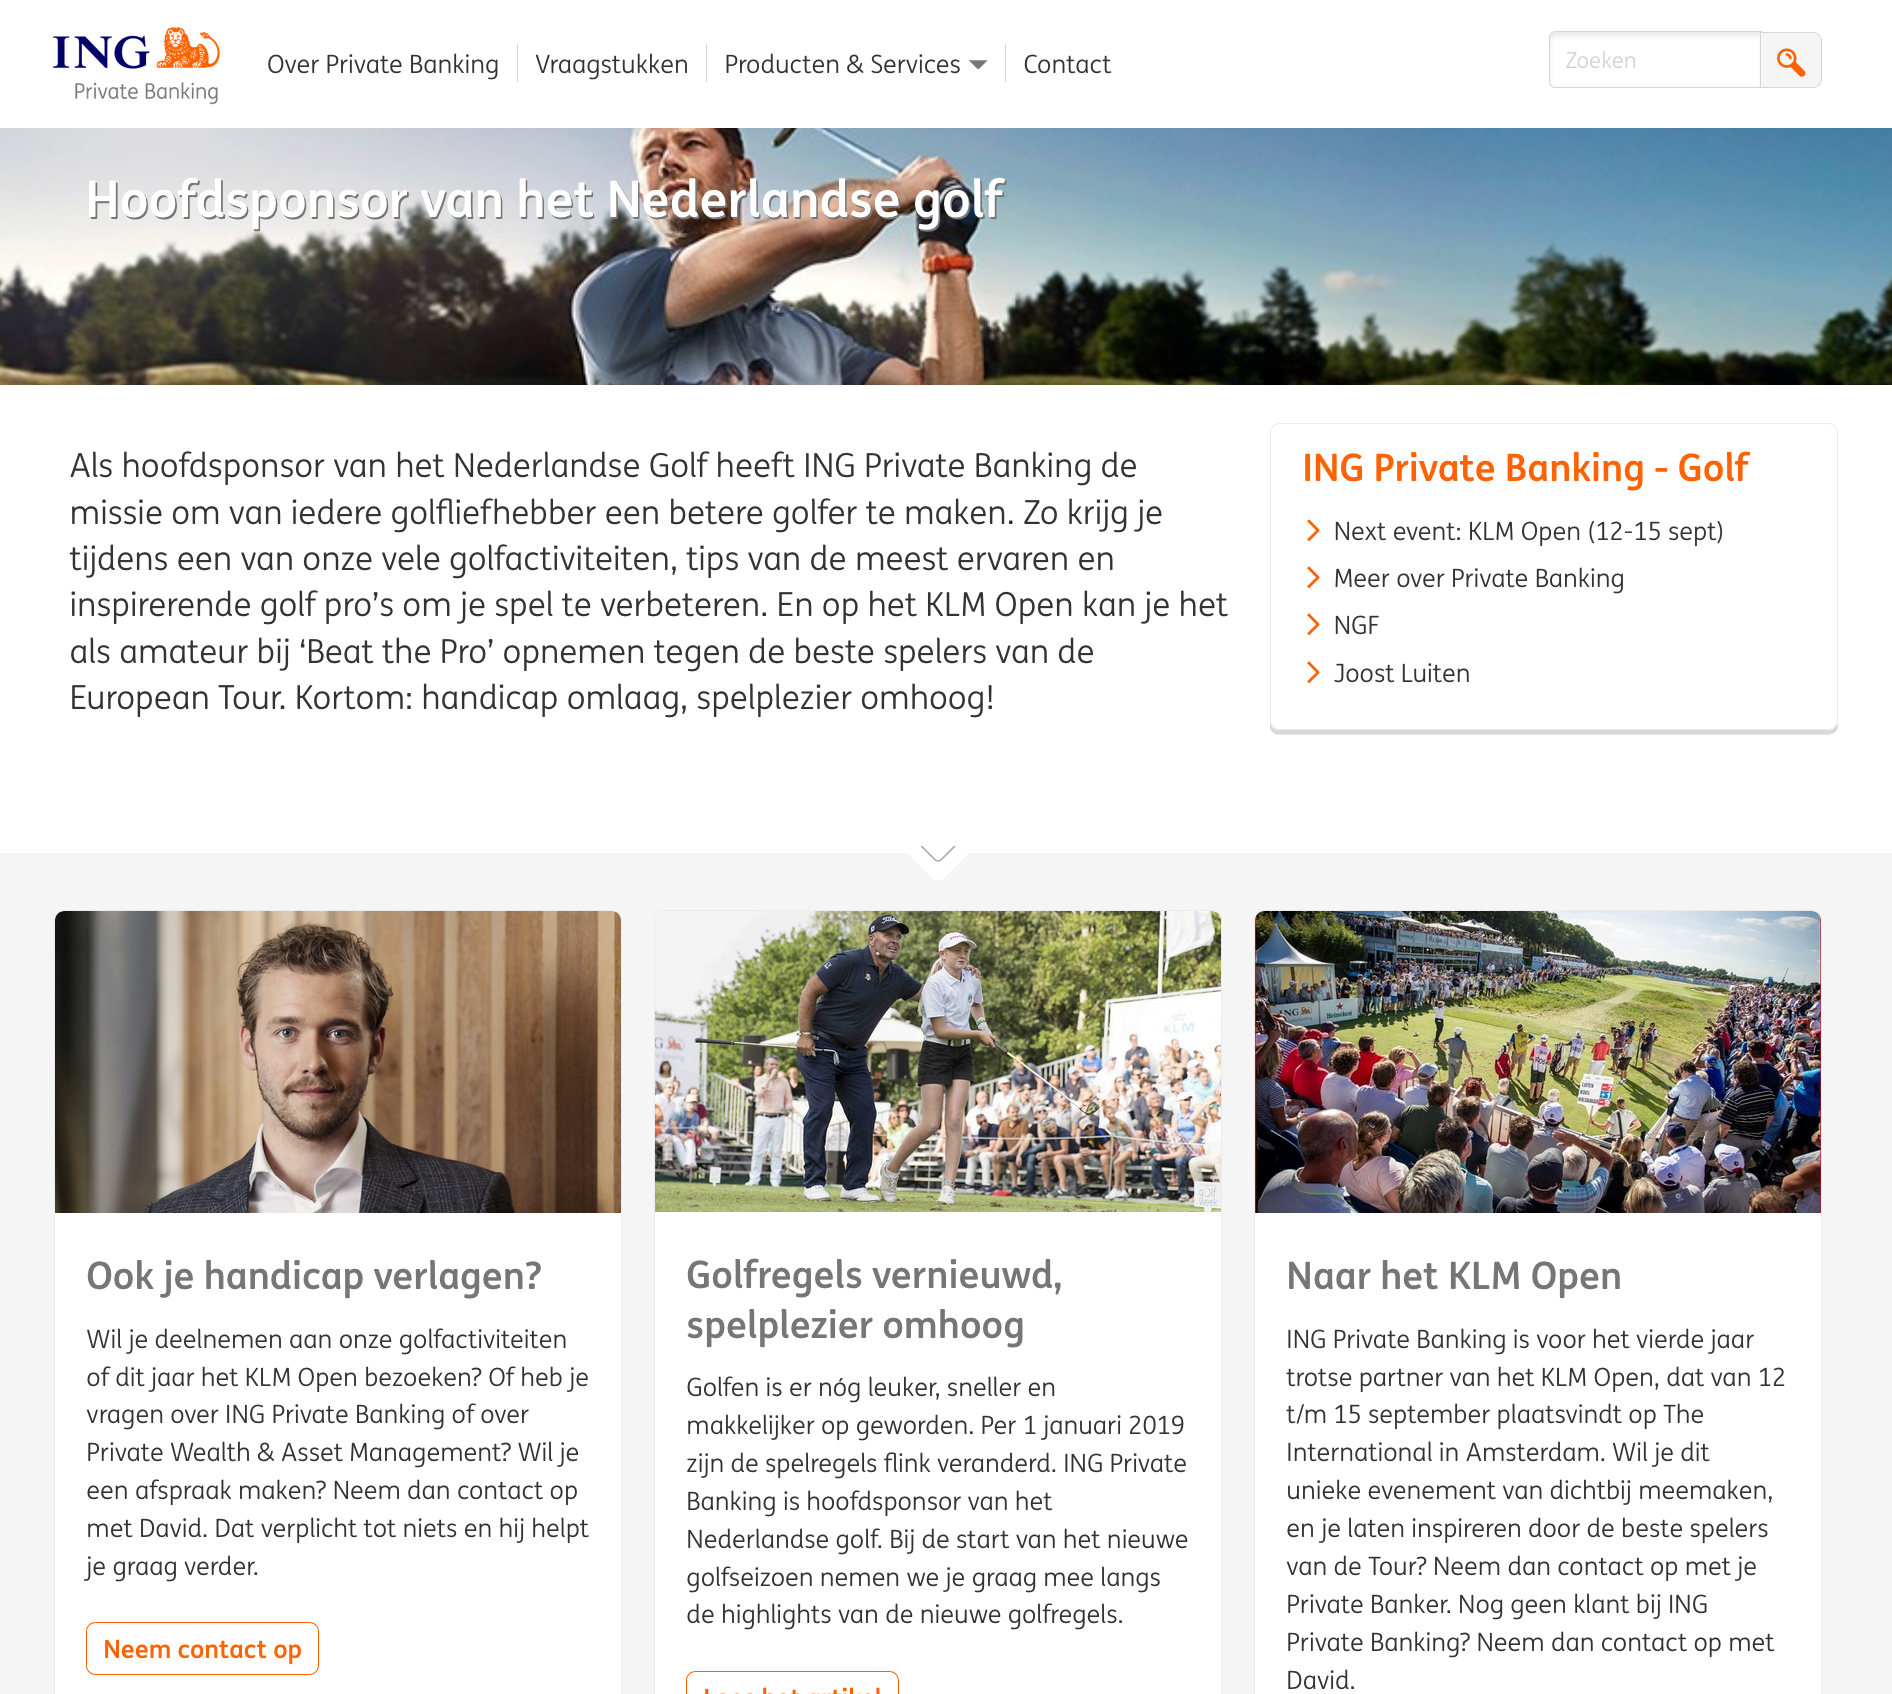 ING Private Banking 